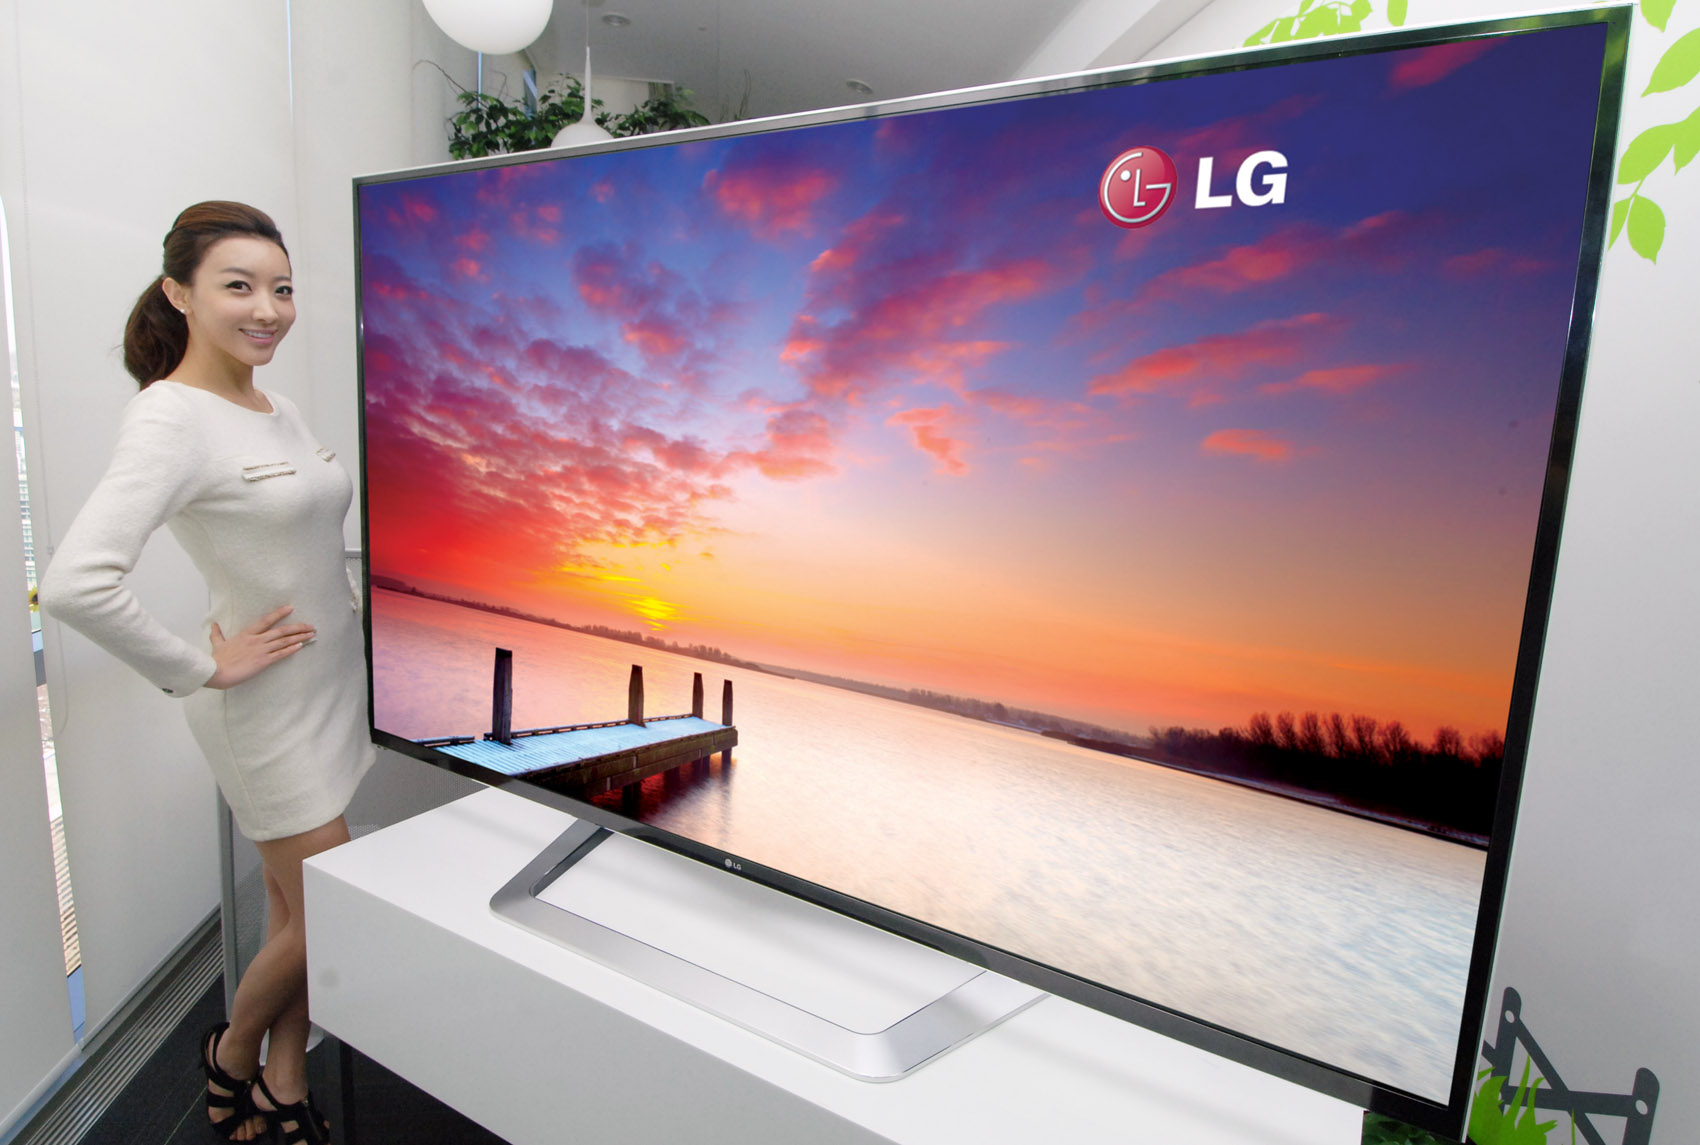 A model poses next to the world’s largest 84-inch 3D Ultra Definition TV